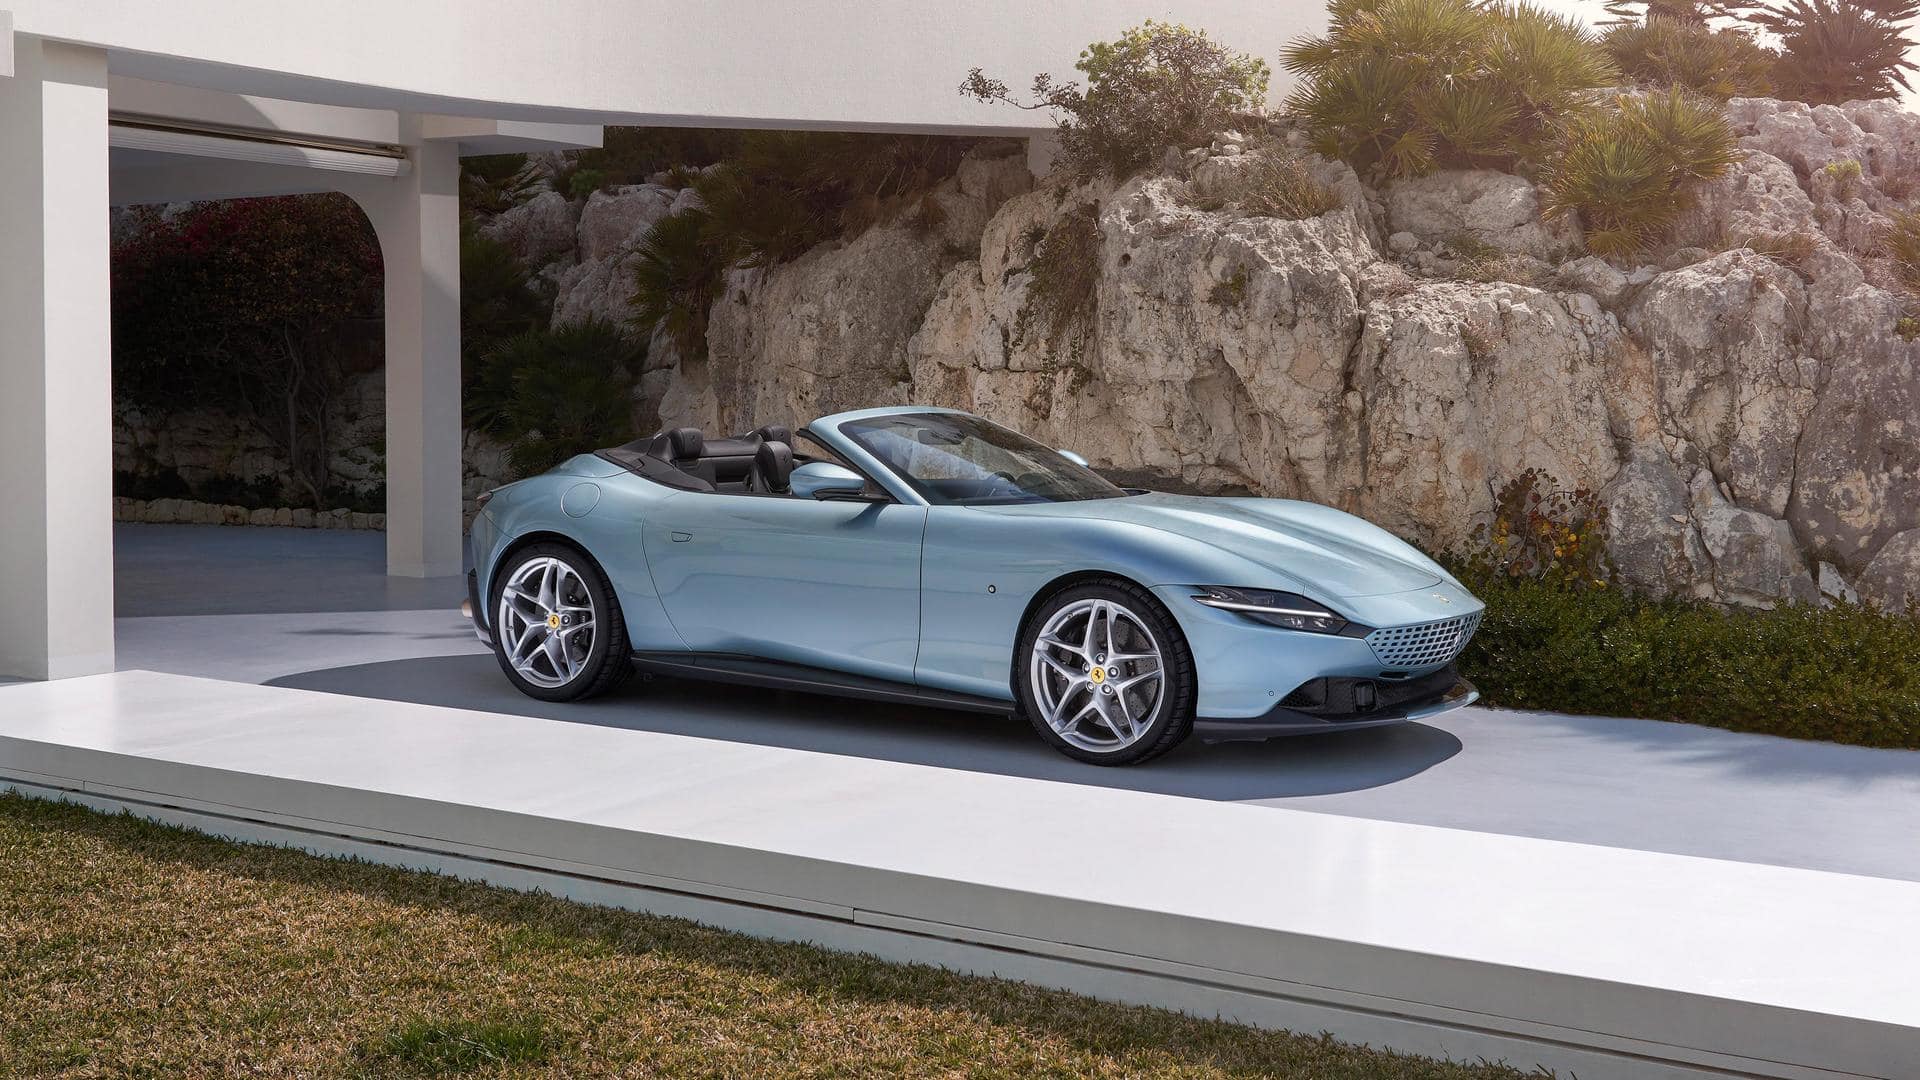 Top features of Roma Spider, Ferrari's all-new entry-level convertible car